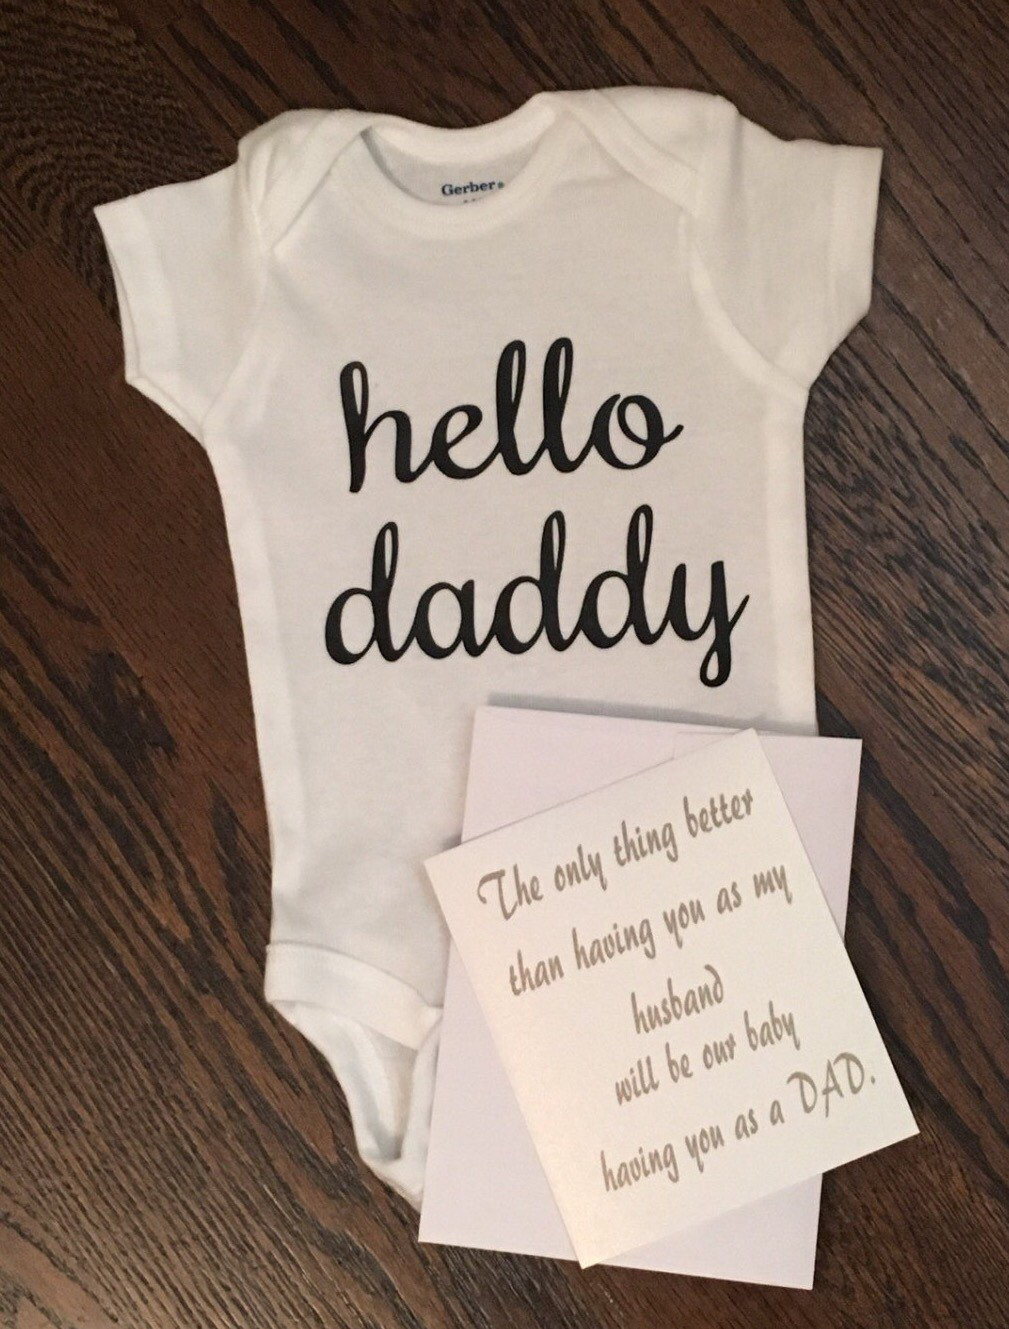 Gift Ideas For Dad From Baby Girl
 Pregnancy announcement Hello daddy onesie t for by